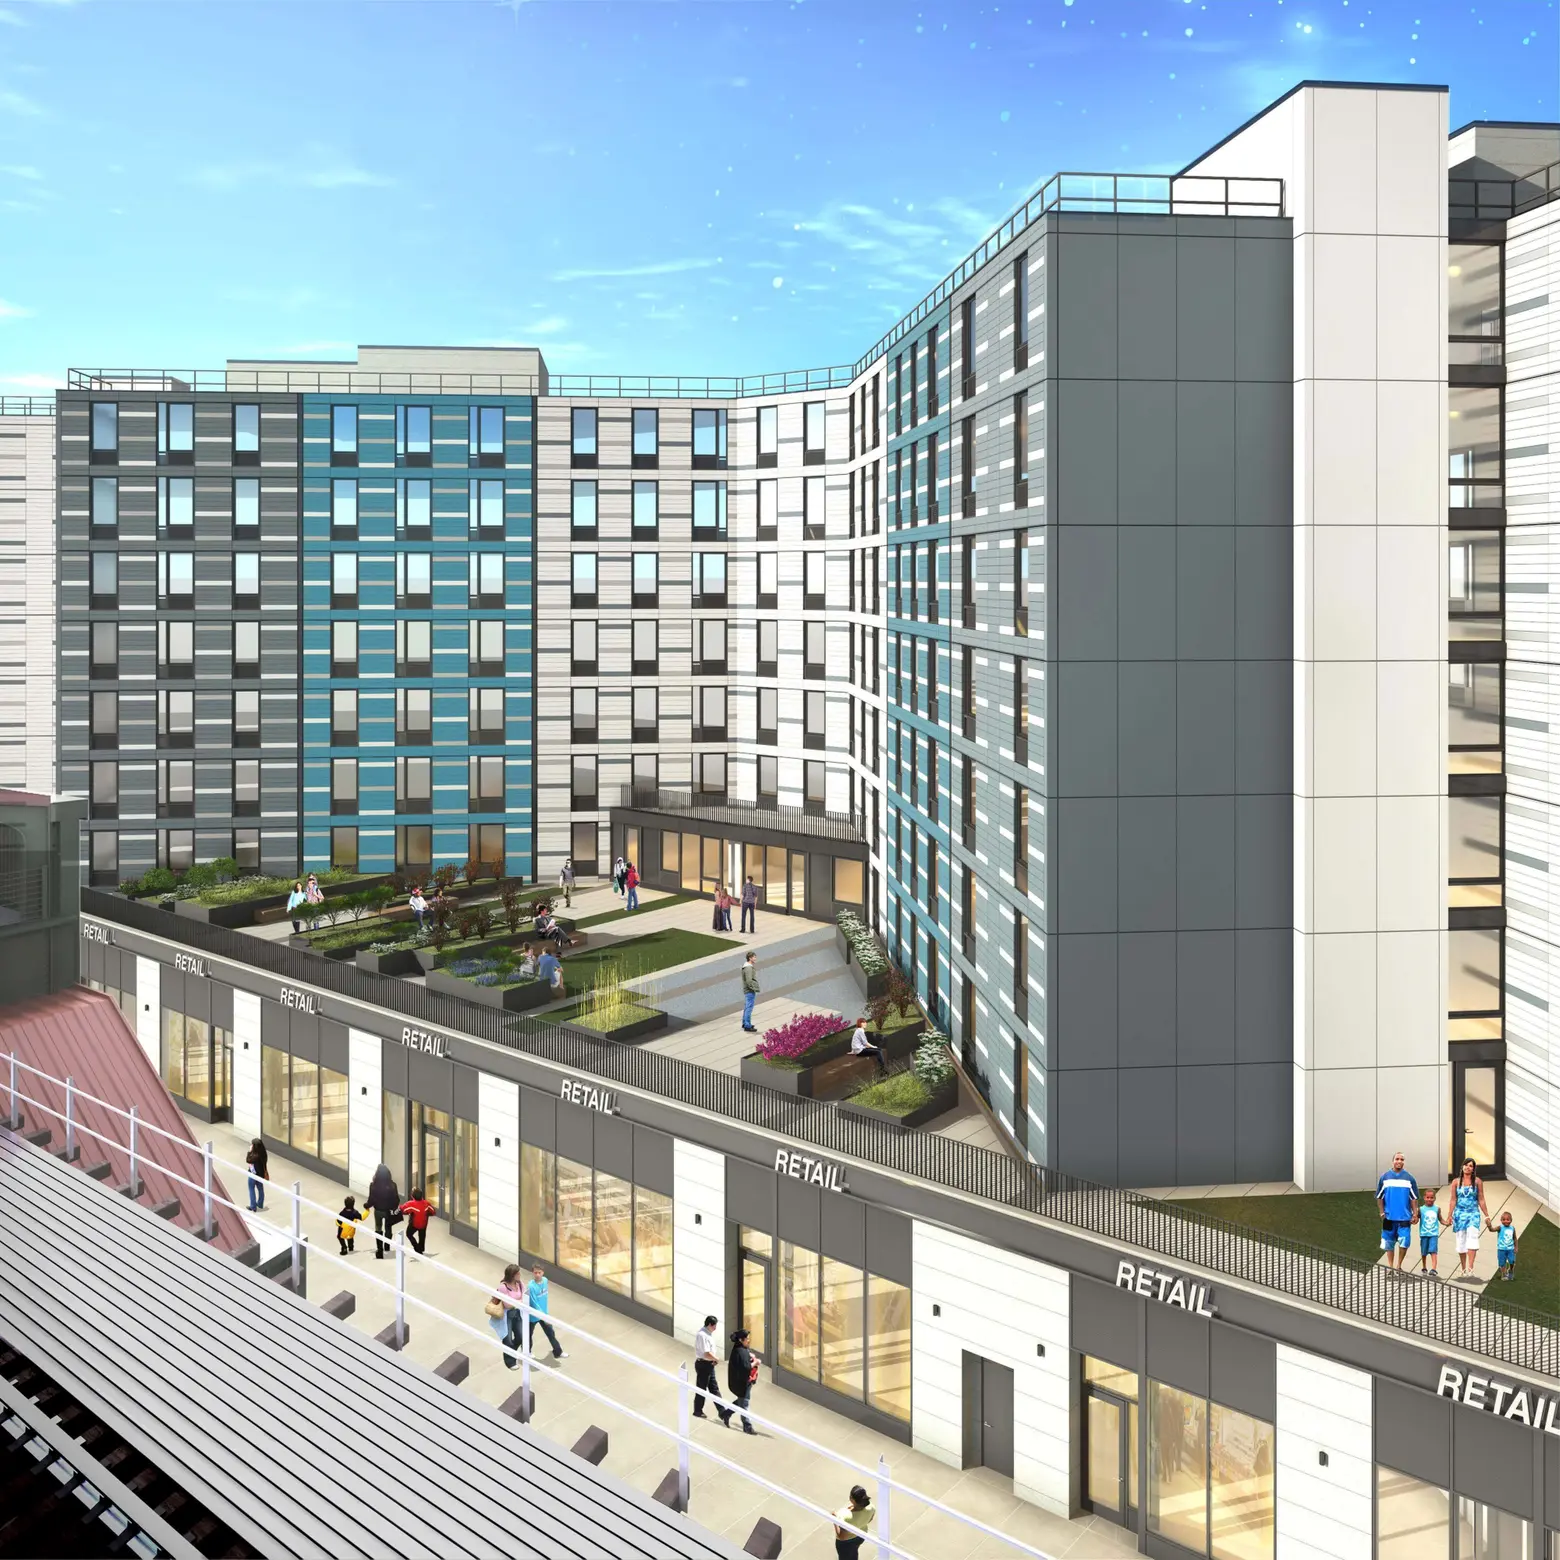 On Bed-Stuy-Bushwick border, lottery opens for 90 affordable units, from $486/month